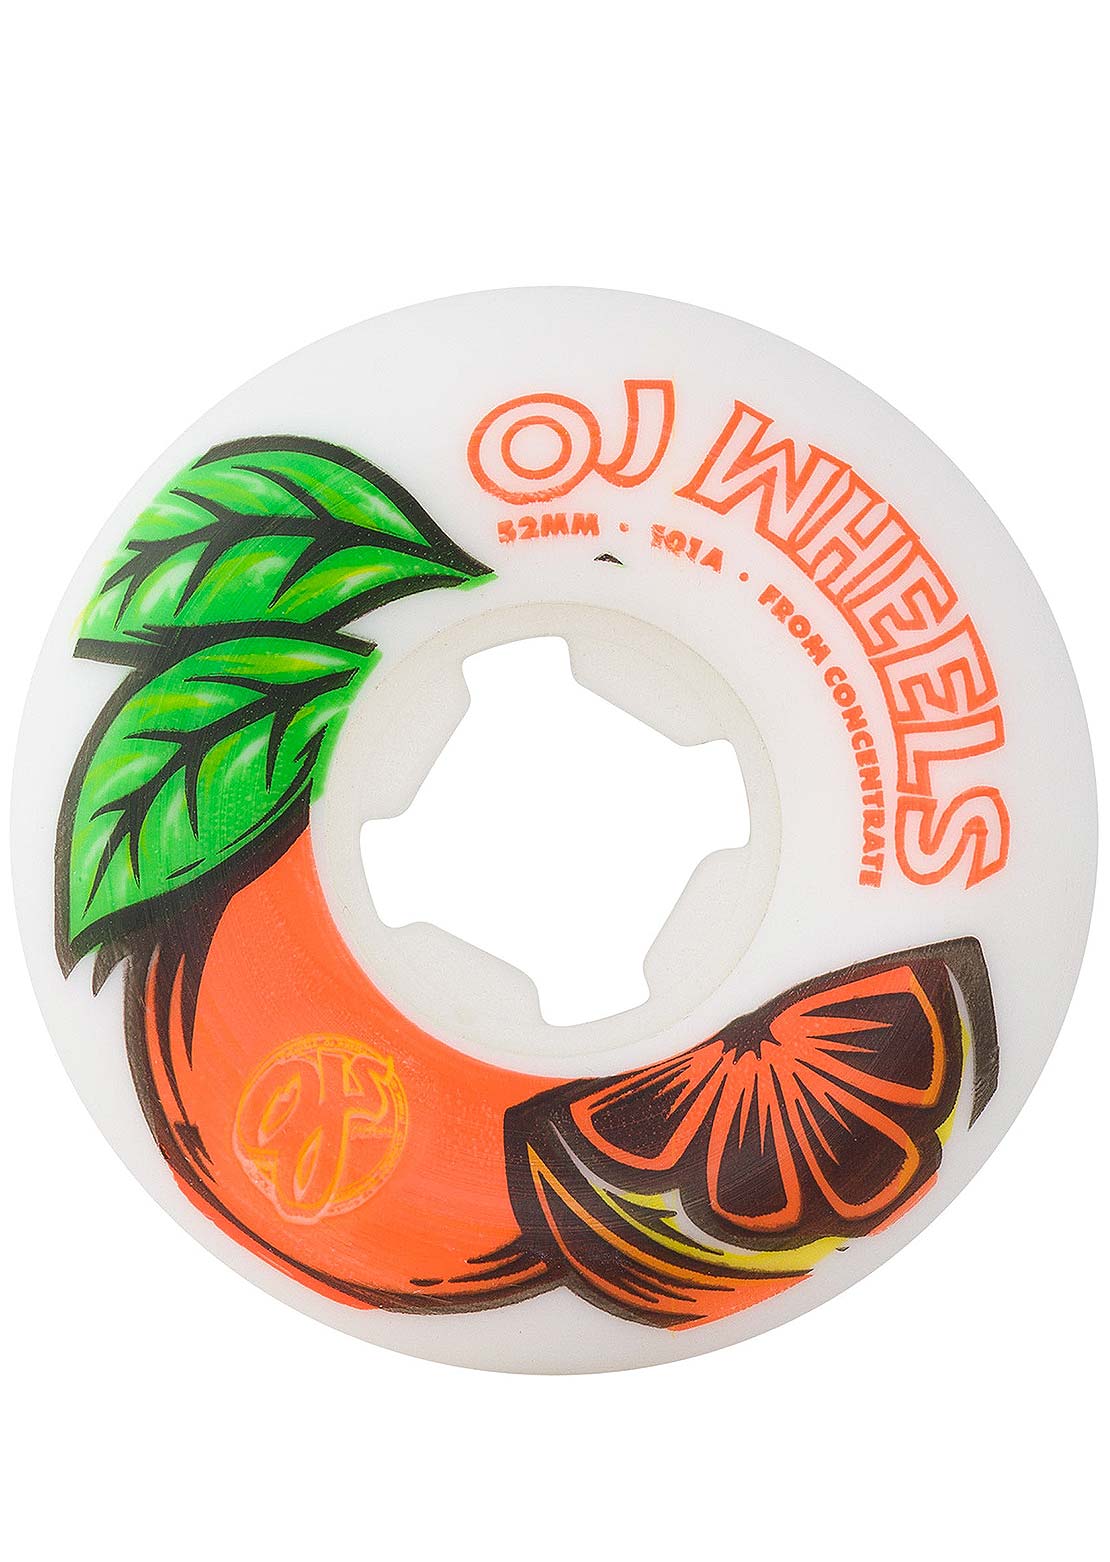 OJ Wheels From Concentrate 101A Skateboard Wheels 52 mm White